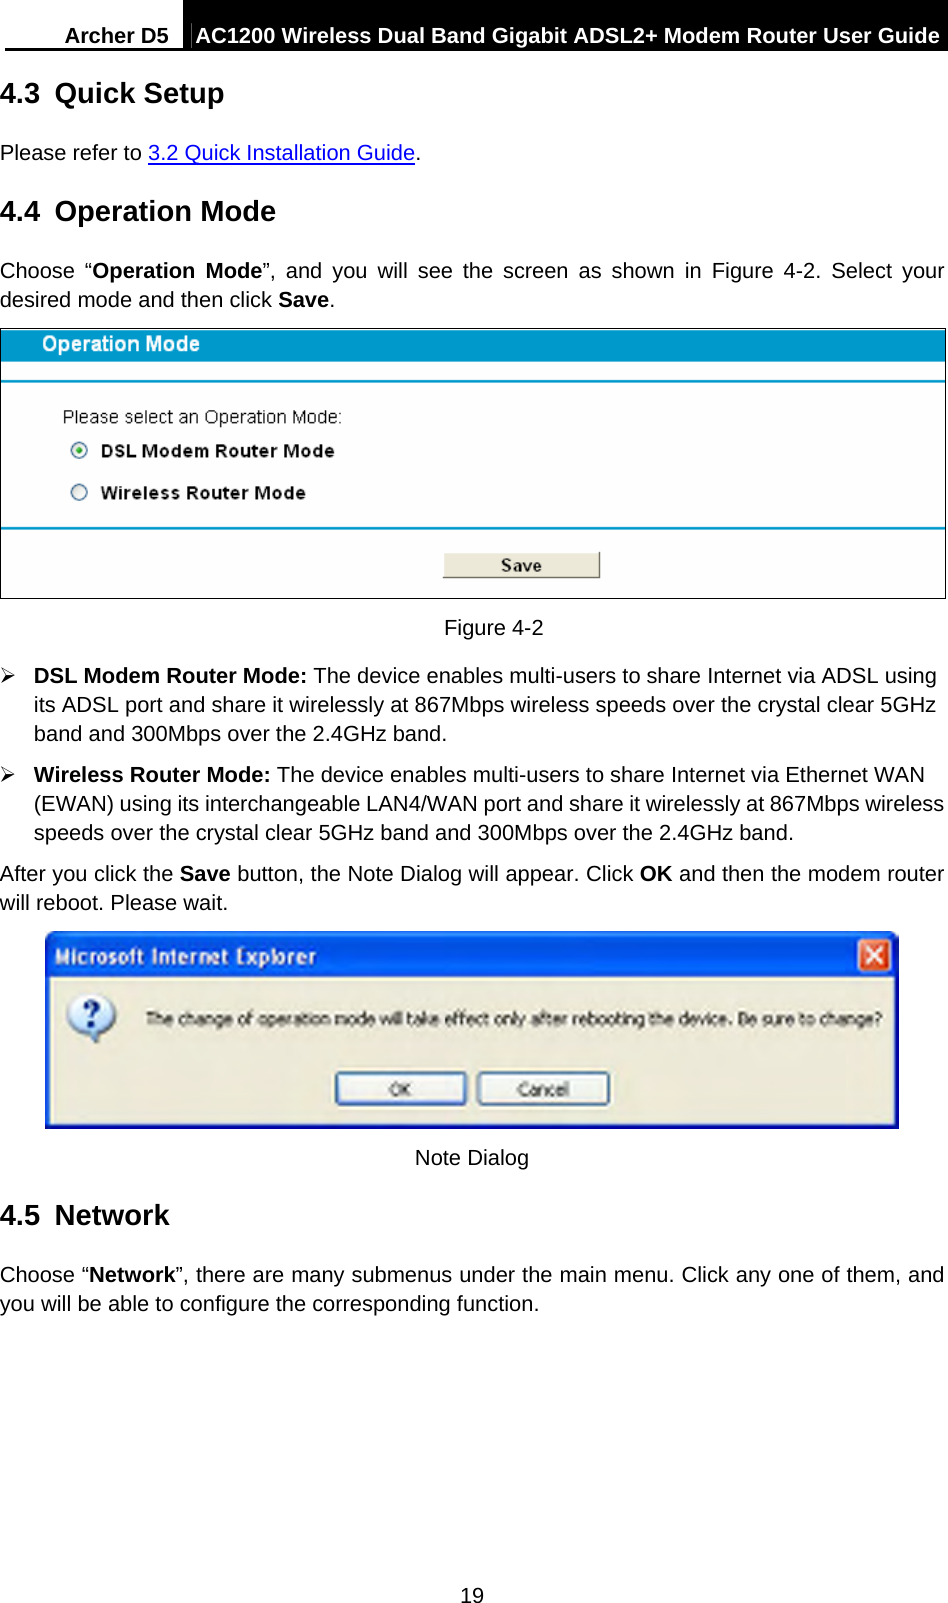 Archer D5  AC1200 Wireless Dual Band Gigabit ADSL2+ Modem Router User Guide 19 4.3  Quick Setup Please refer to 3.2 Quick Installation Guide. 4.4  Operation Mode Choose “Operation Mode”, and you will see the screen as shown in Figure 4-2. Select your desired mode and then click Save.  Figure 4-2  DSL Modem Router Mode: The device enables multi-users to share Internet via ADSL using its ADSL port and share it wirelessly at 867Mbps wireless speeds over the crystal clear 5GHz band and 300Mbps over the 2.4GHz band.  Wireless Router Mode: The device enables multi-users to share Internet via Ethernet WAN (EWAN) using its interchangeable LAN4/WAN port and share it wirelessly at 867Mbps wireless speeds over the crystal clear 5GHz band and 300Mbps over the 2.4GHz band. After you click the Save button, the Note Dialog will appear. Click OK and then the modem router will reboot. Please wait.  Note Dialog 4.5  Network Choose “Network”, there are many submenus under the main menu. Click any one of them, and you will be able to configure the corresponding function.   